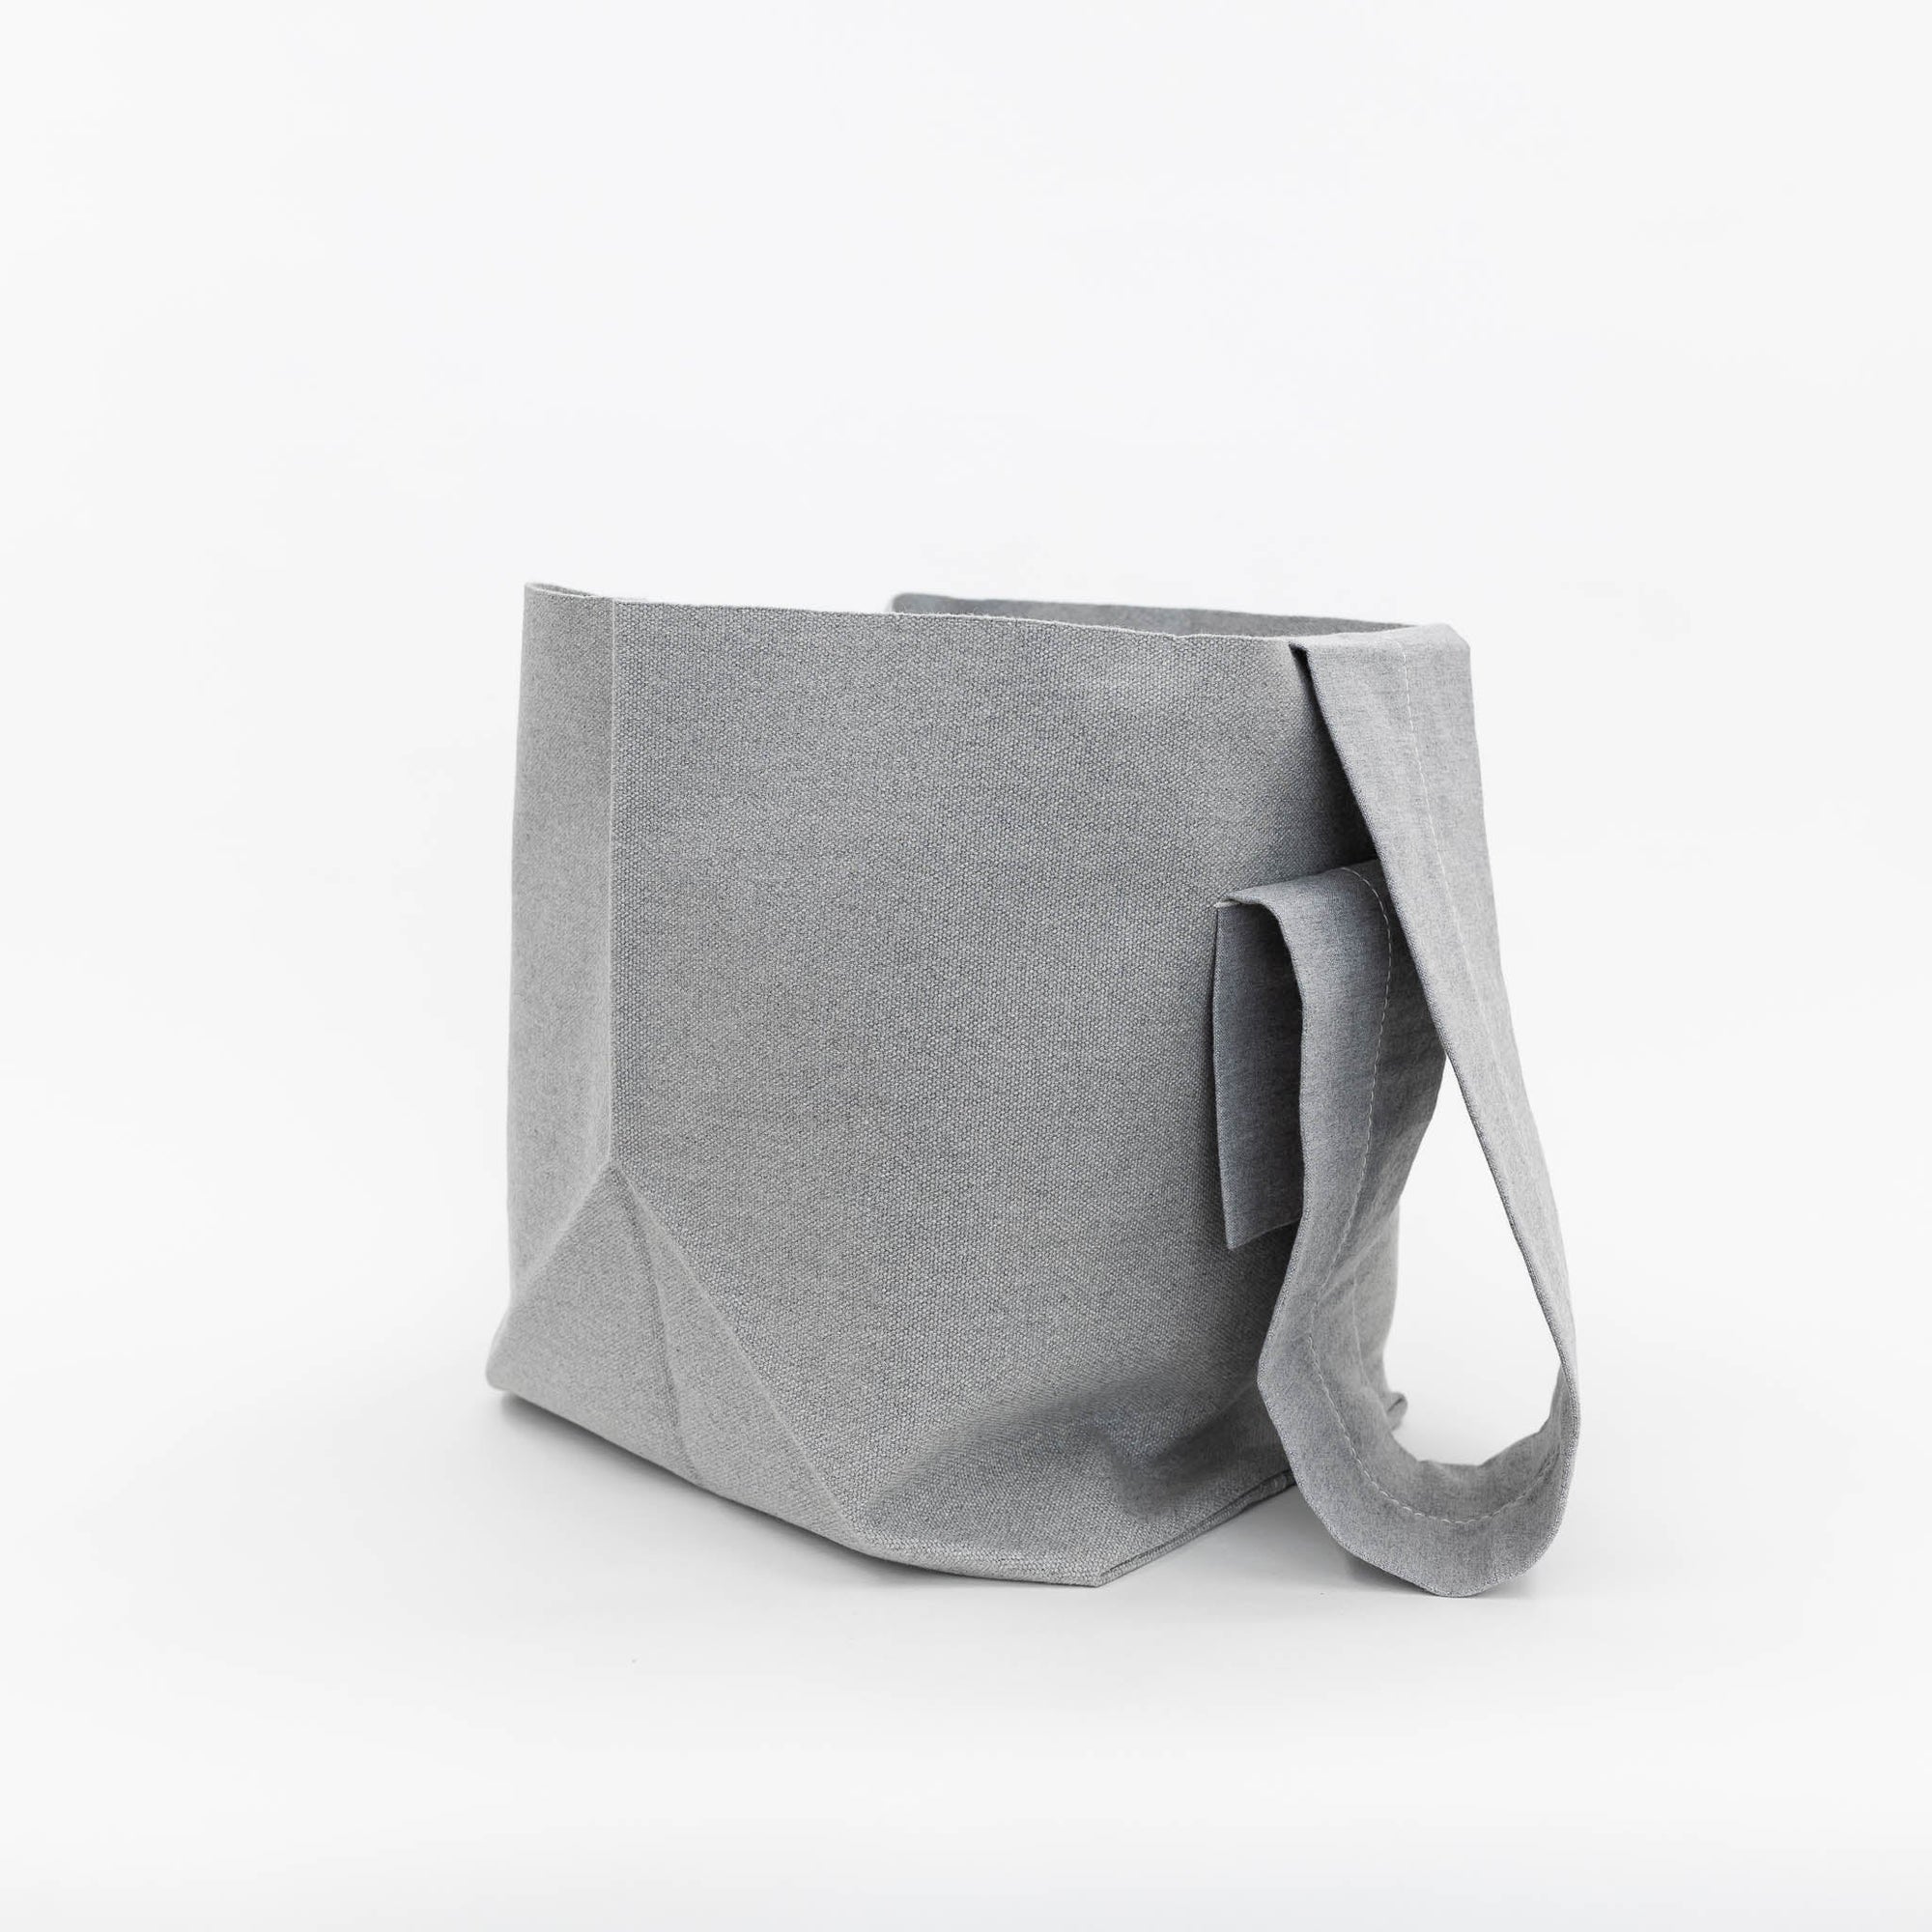 How to Live Origami Bag | Tortoise General Store